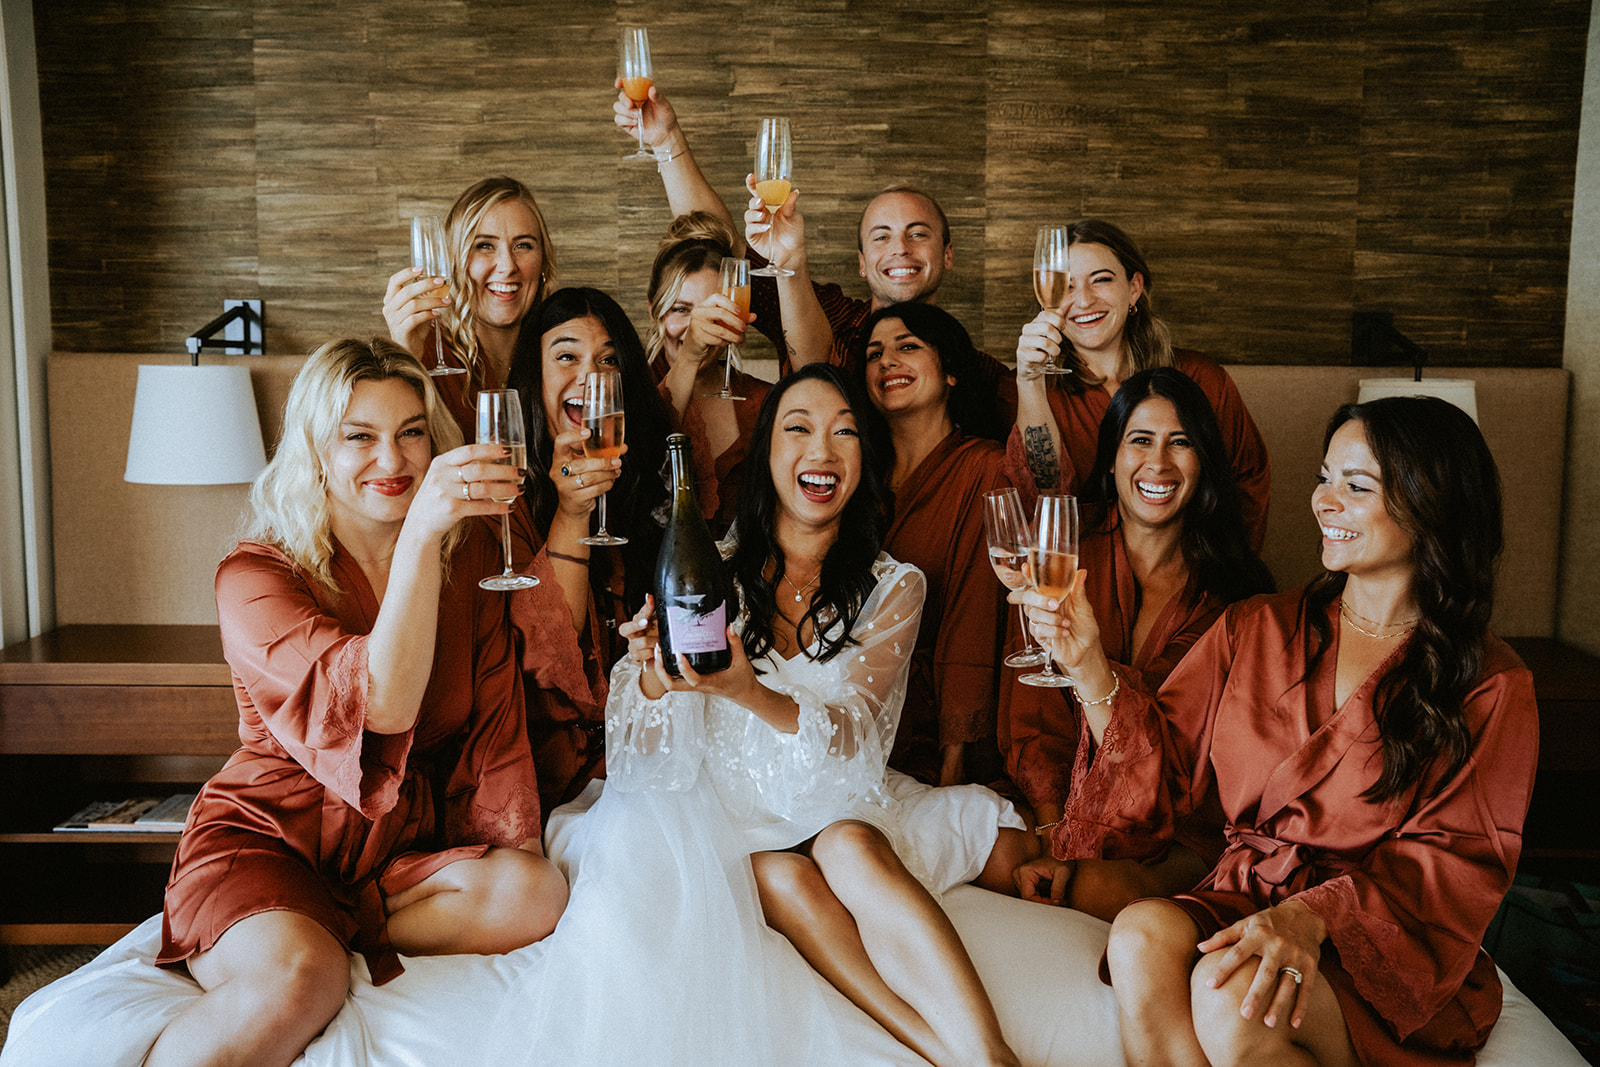 Bridal party celebrating and enjoying some champagne with the bride before the ceremony